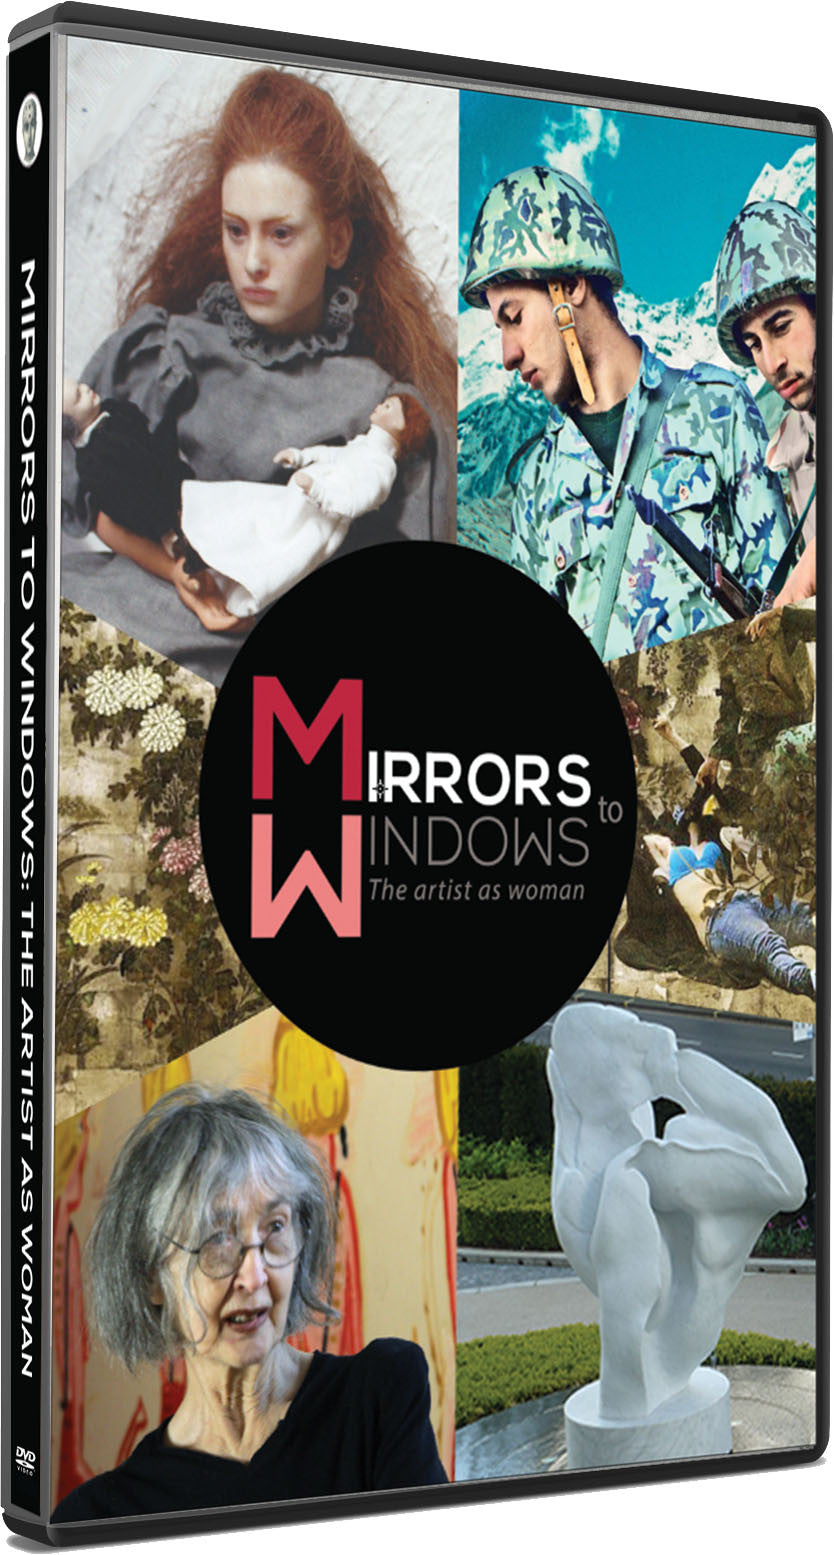 Mirrors to Windows: The Artist As Woman